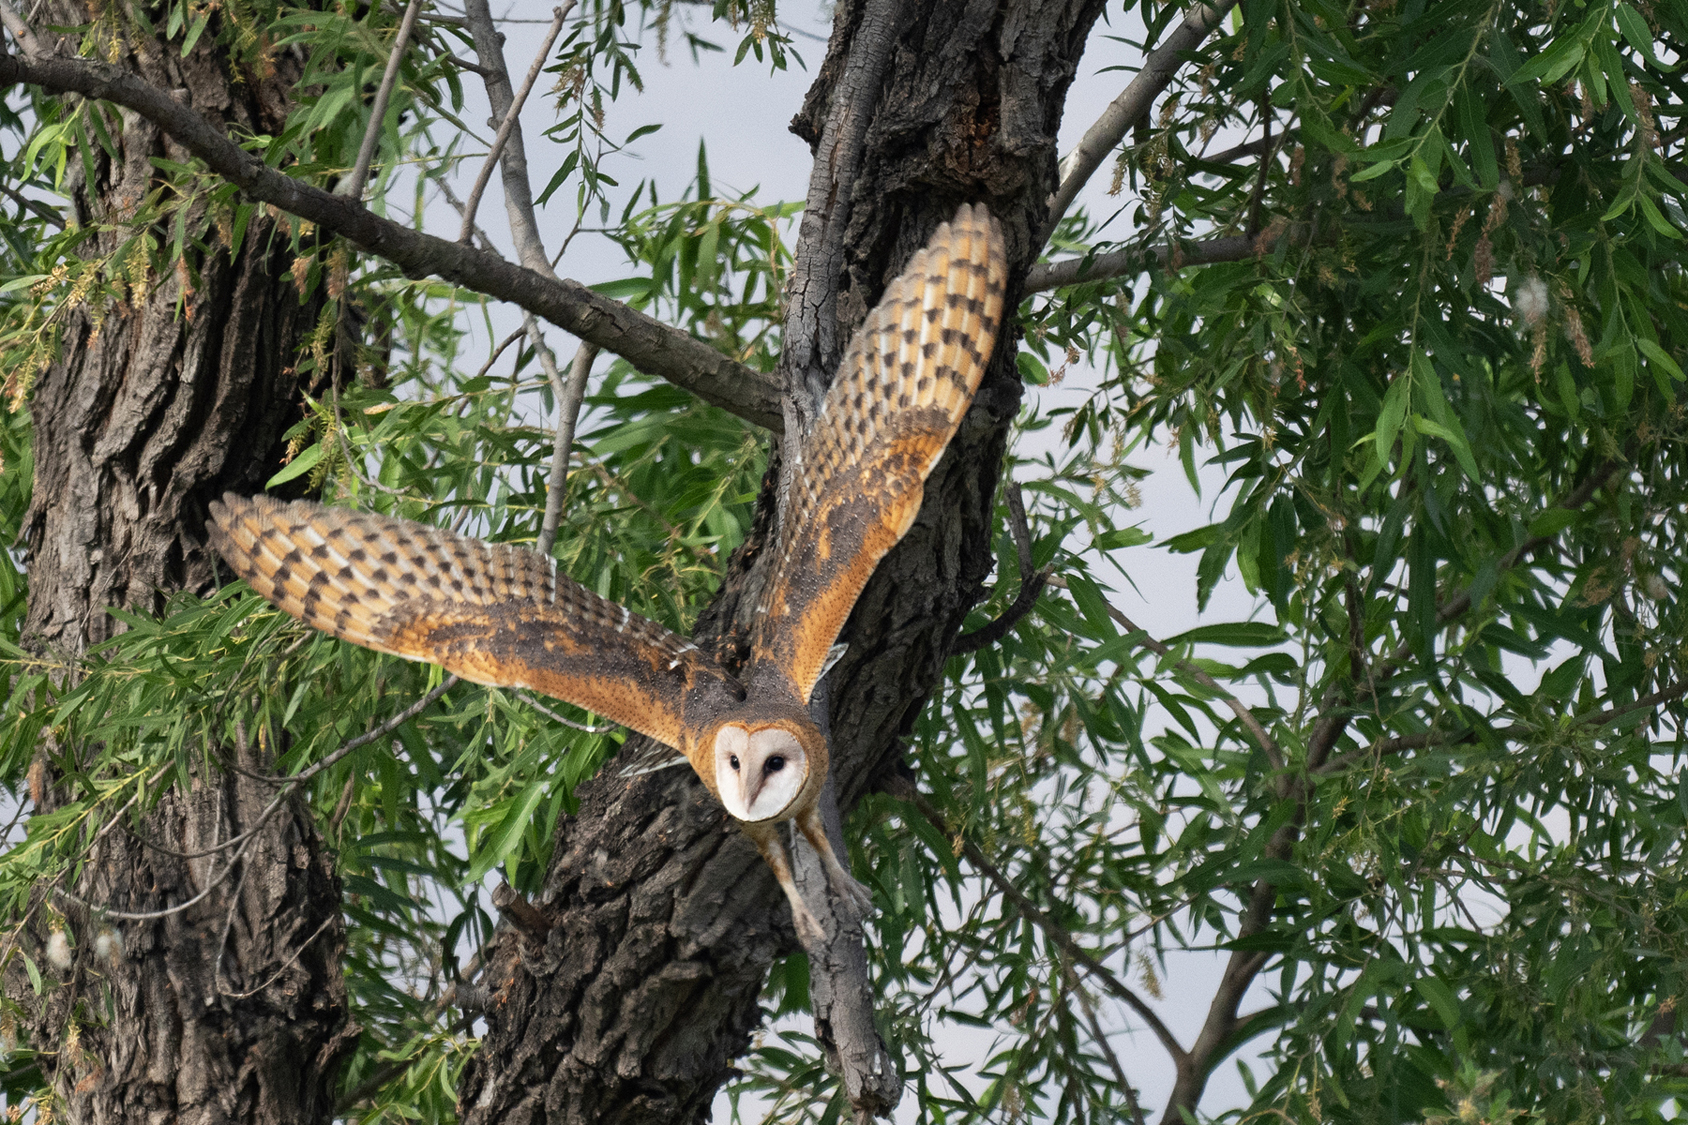 BARN OWL LAUNCHES OFF TREE backcountry gallery _DSC3963.jpg